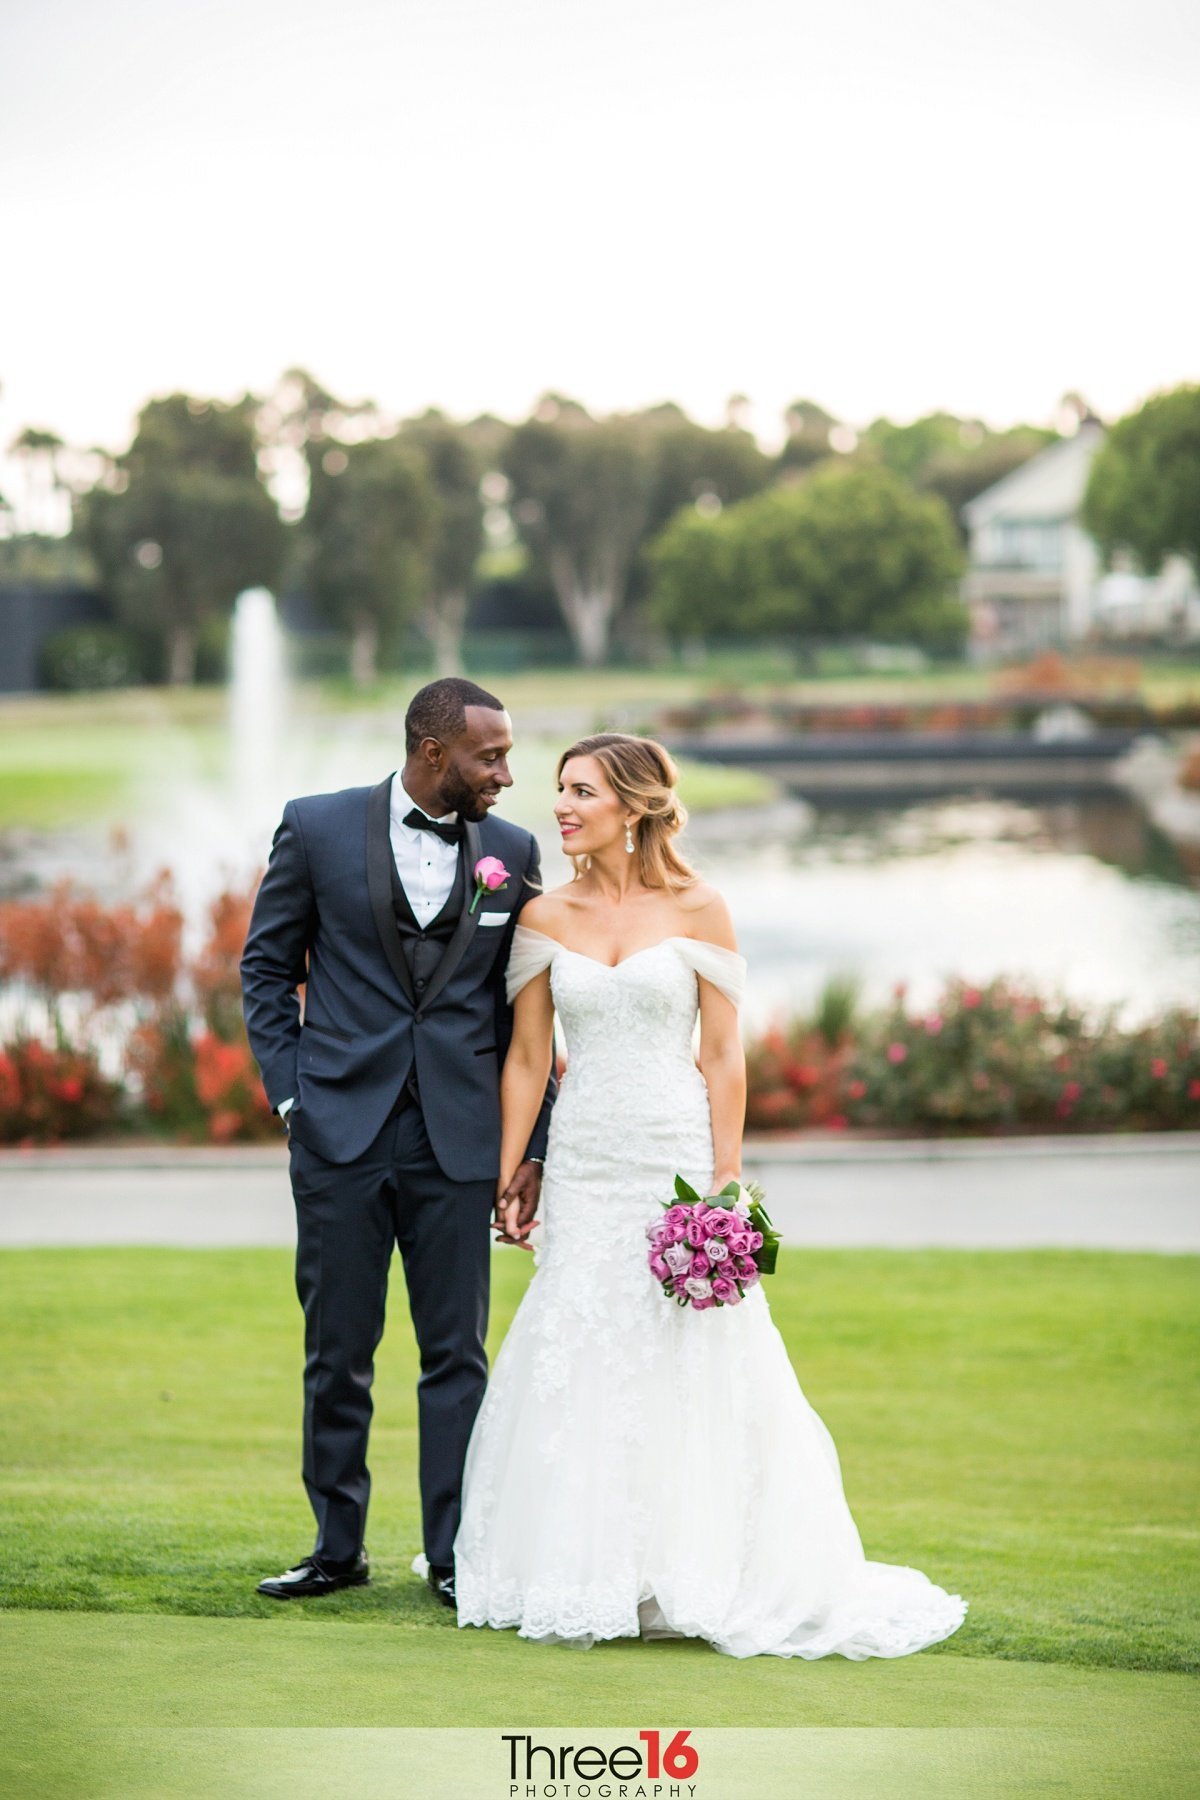 Bride and Groom look at each other on the golf course of the SeaCliff Country Club